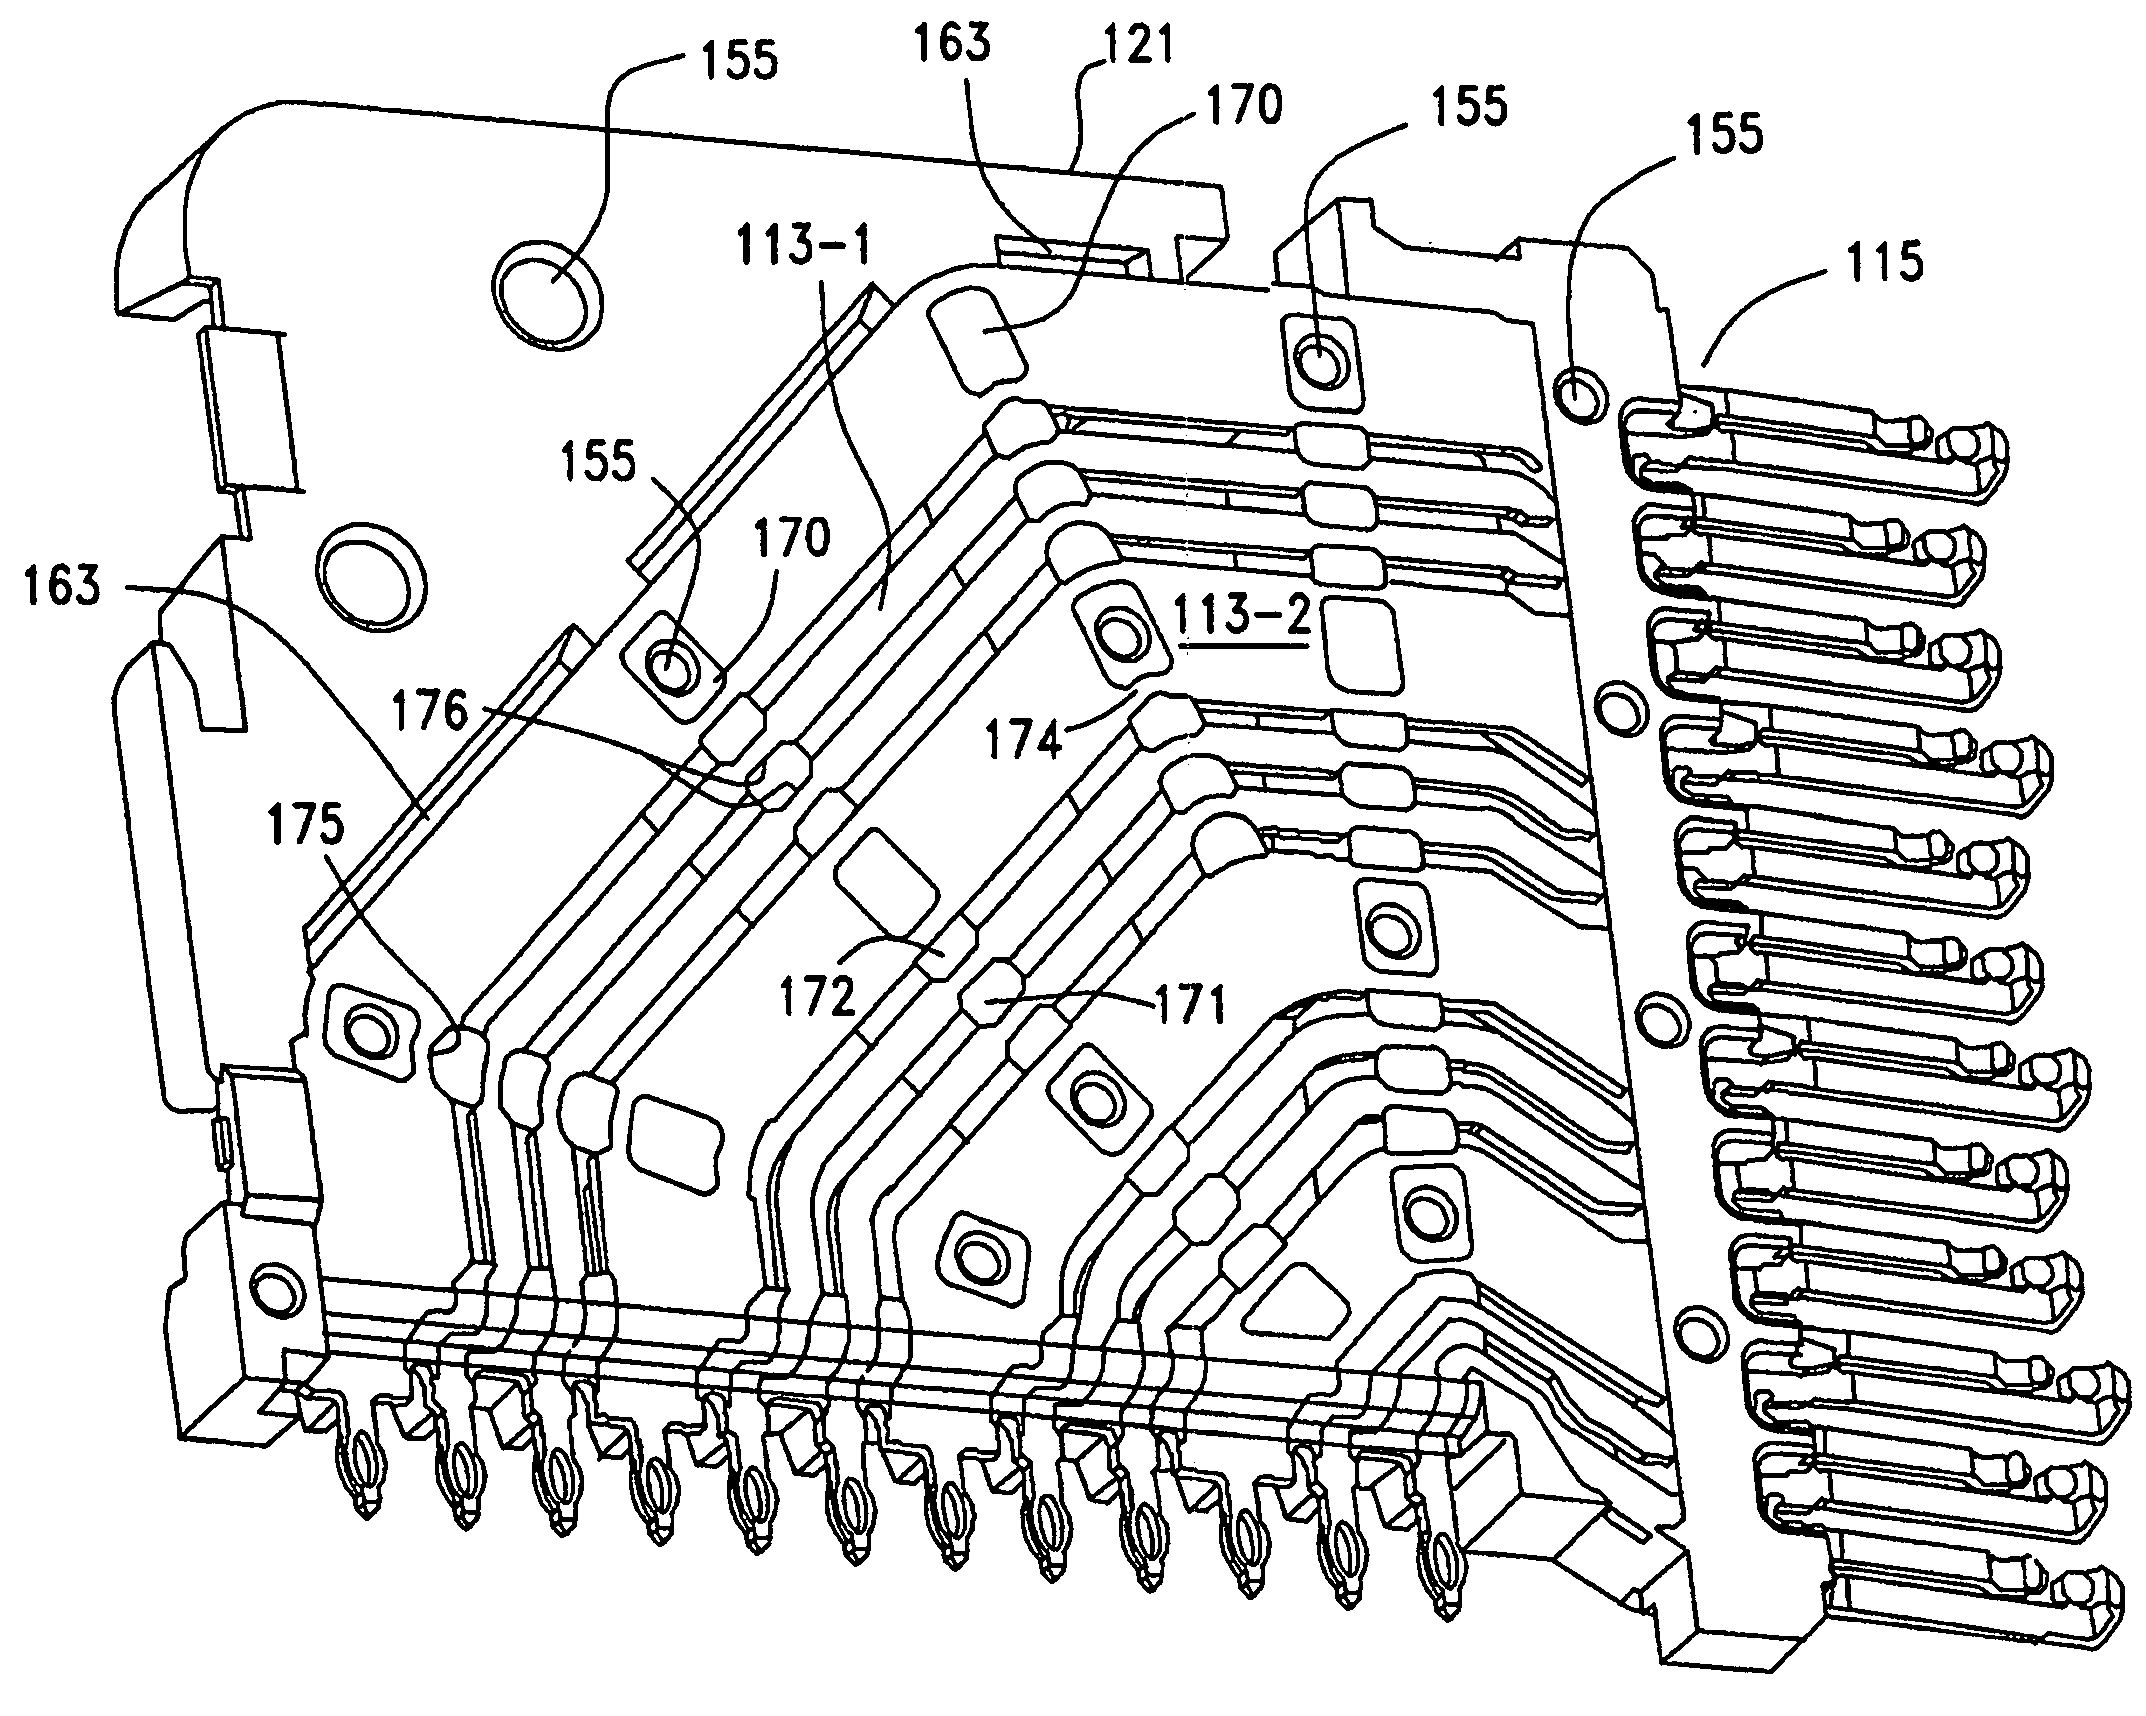 Impedance control in connector mounting areas